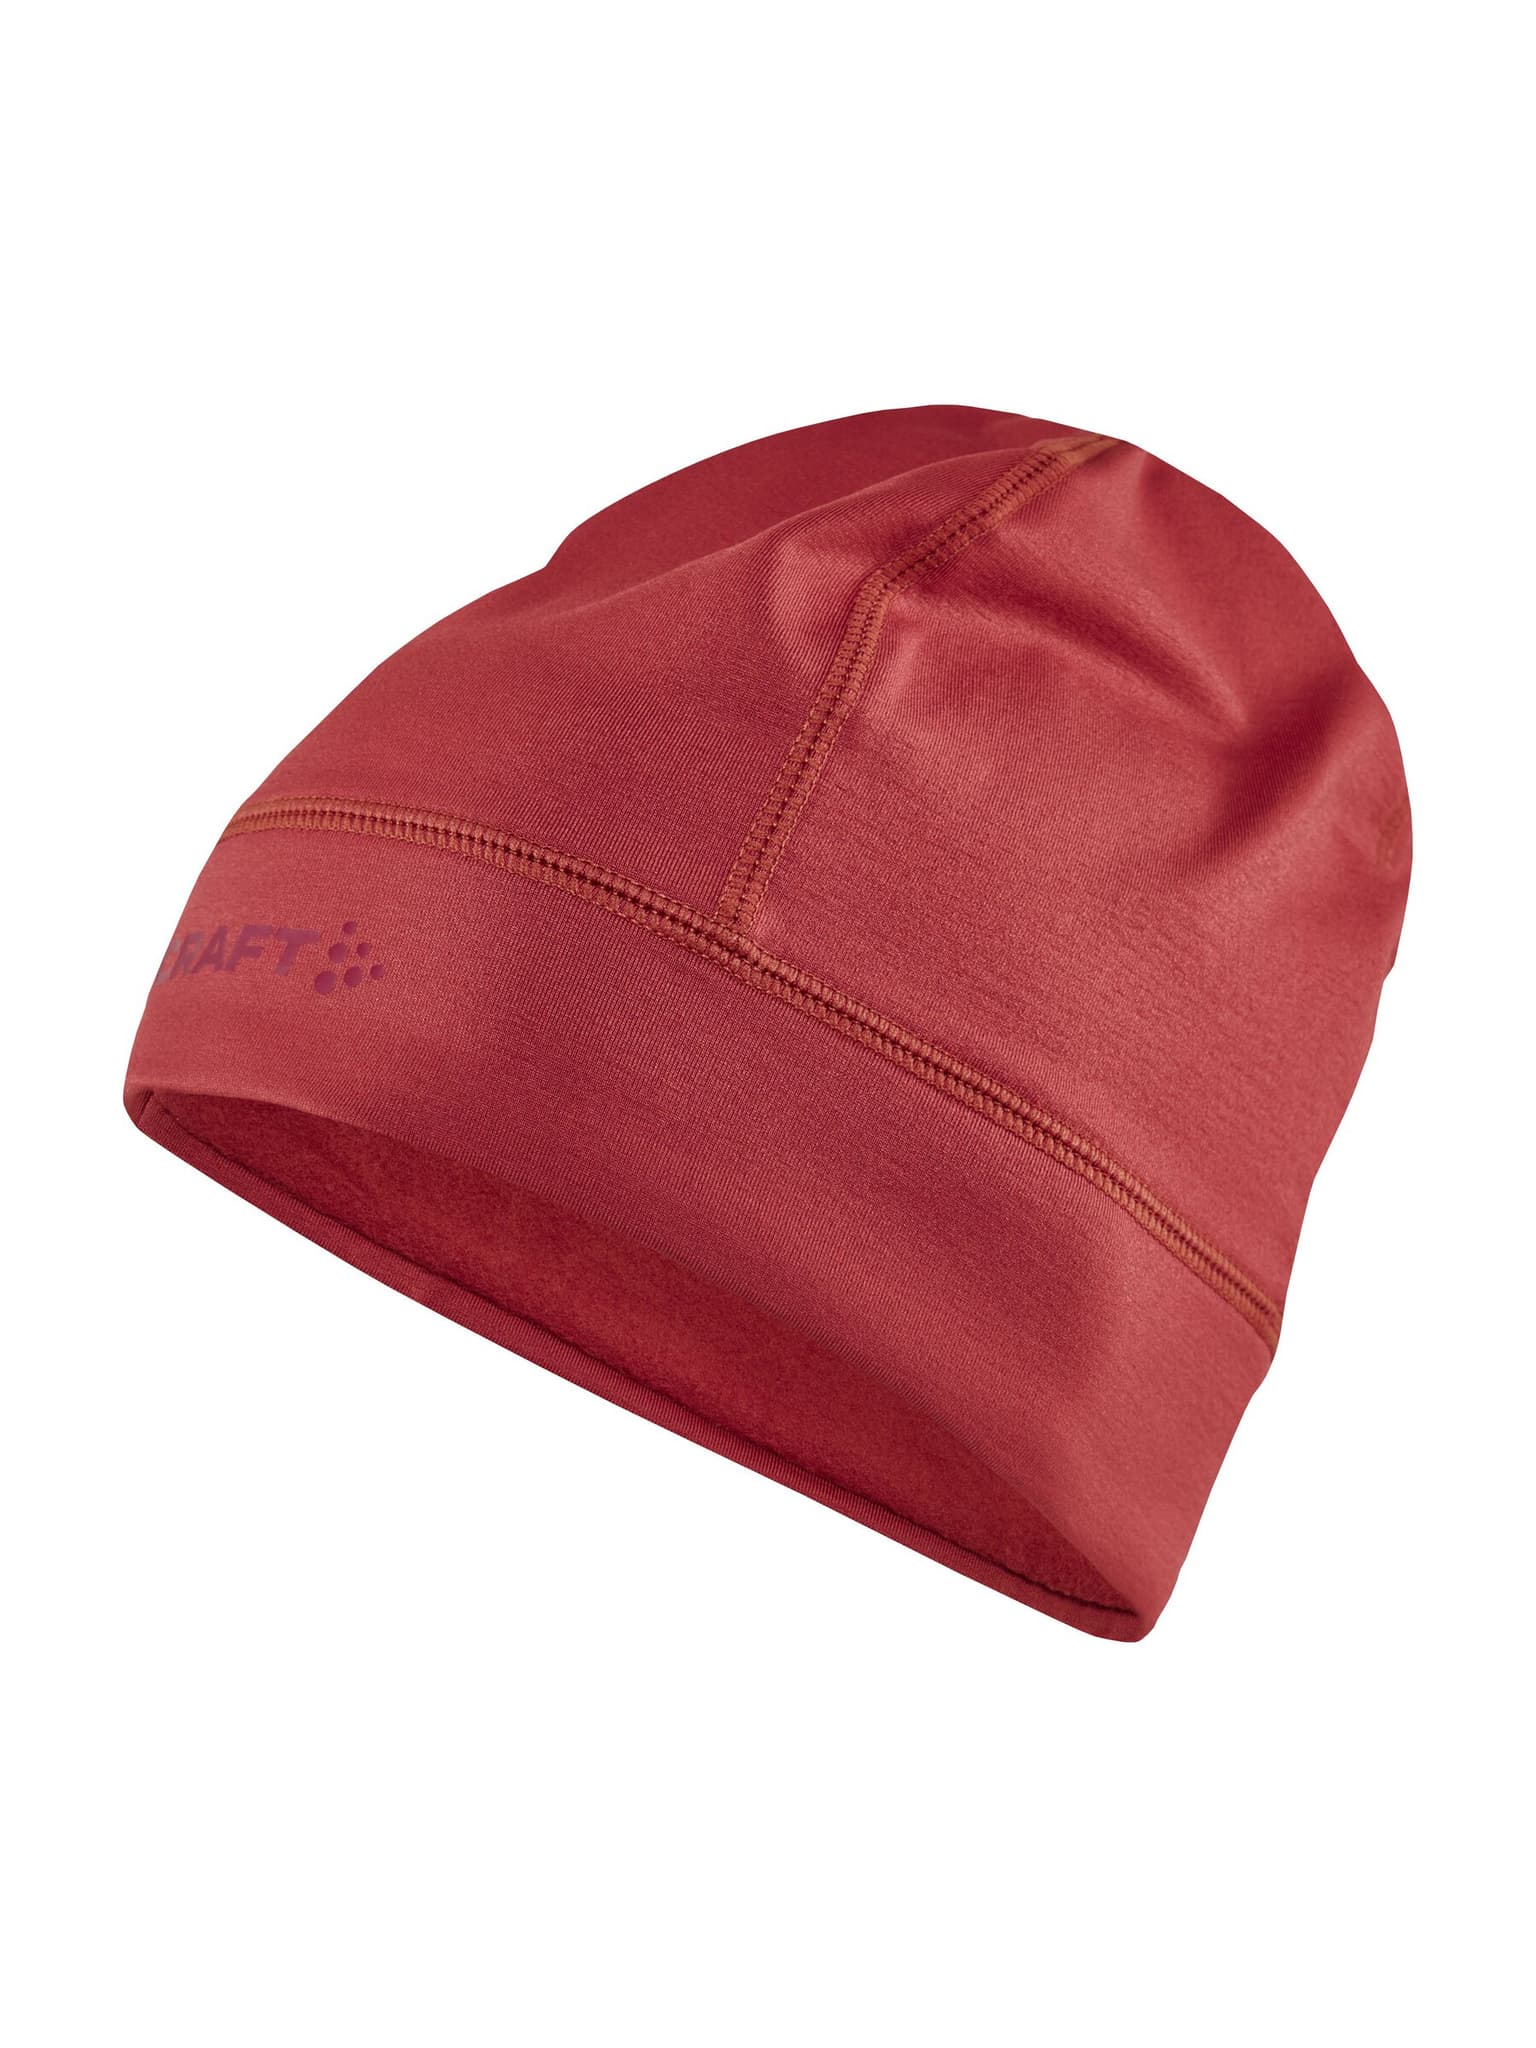 Craft Craft CORE ESSENCE THERMAL HAT Mütze rouge 1